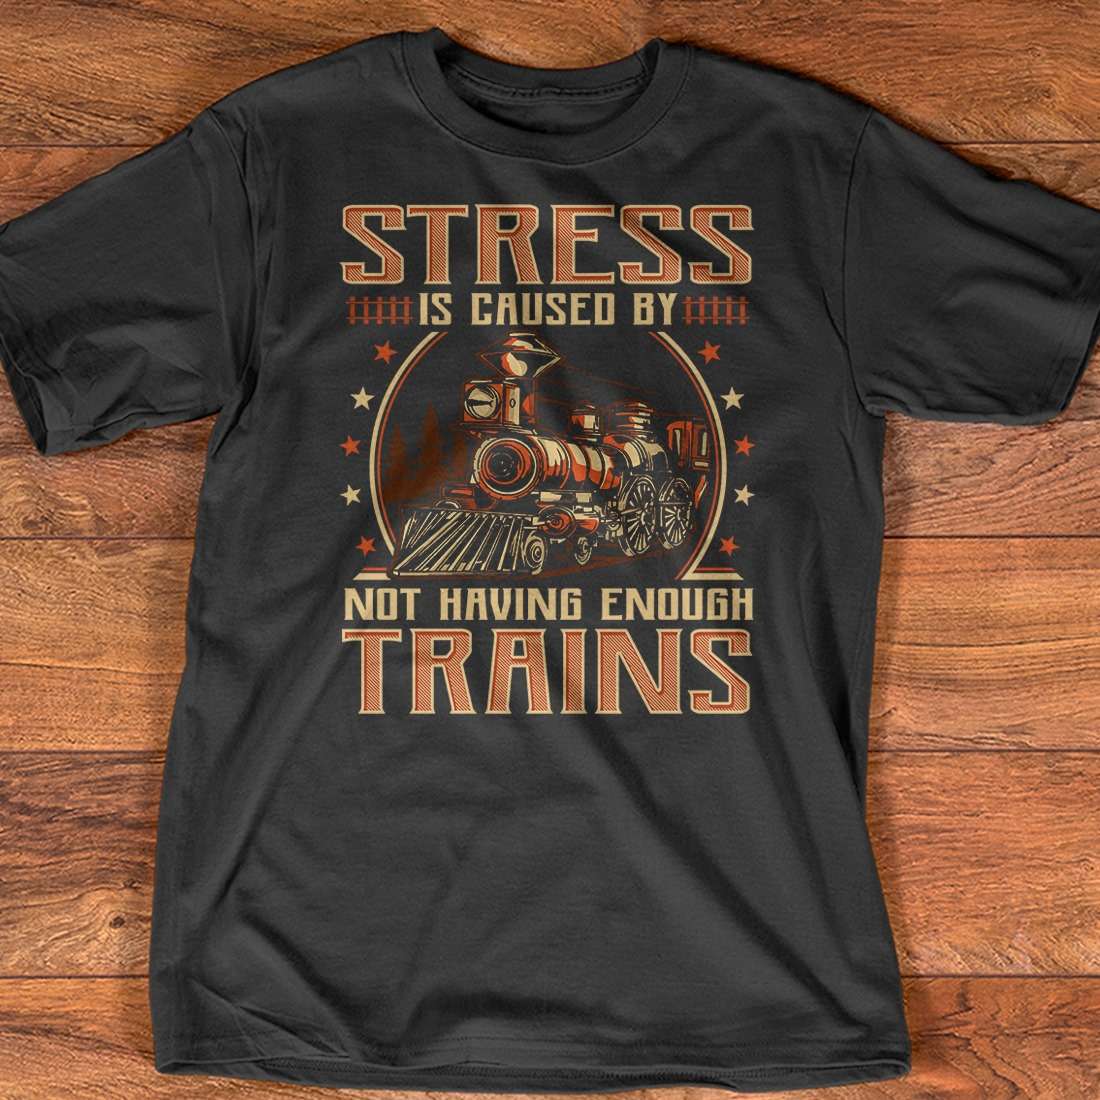 Stress is caused by not having enough trains - Train driver the job